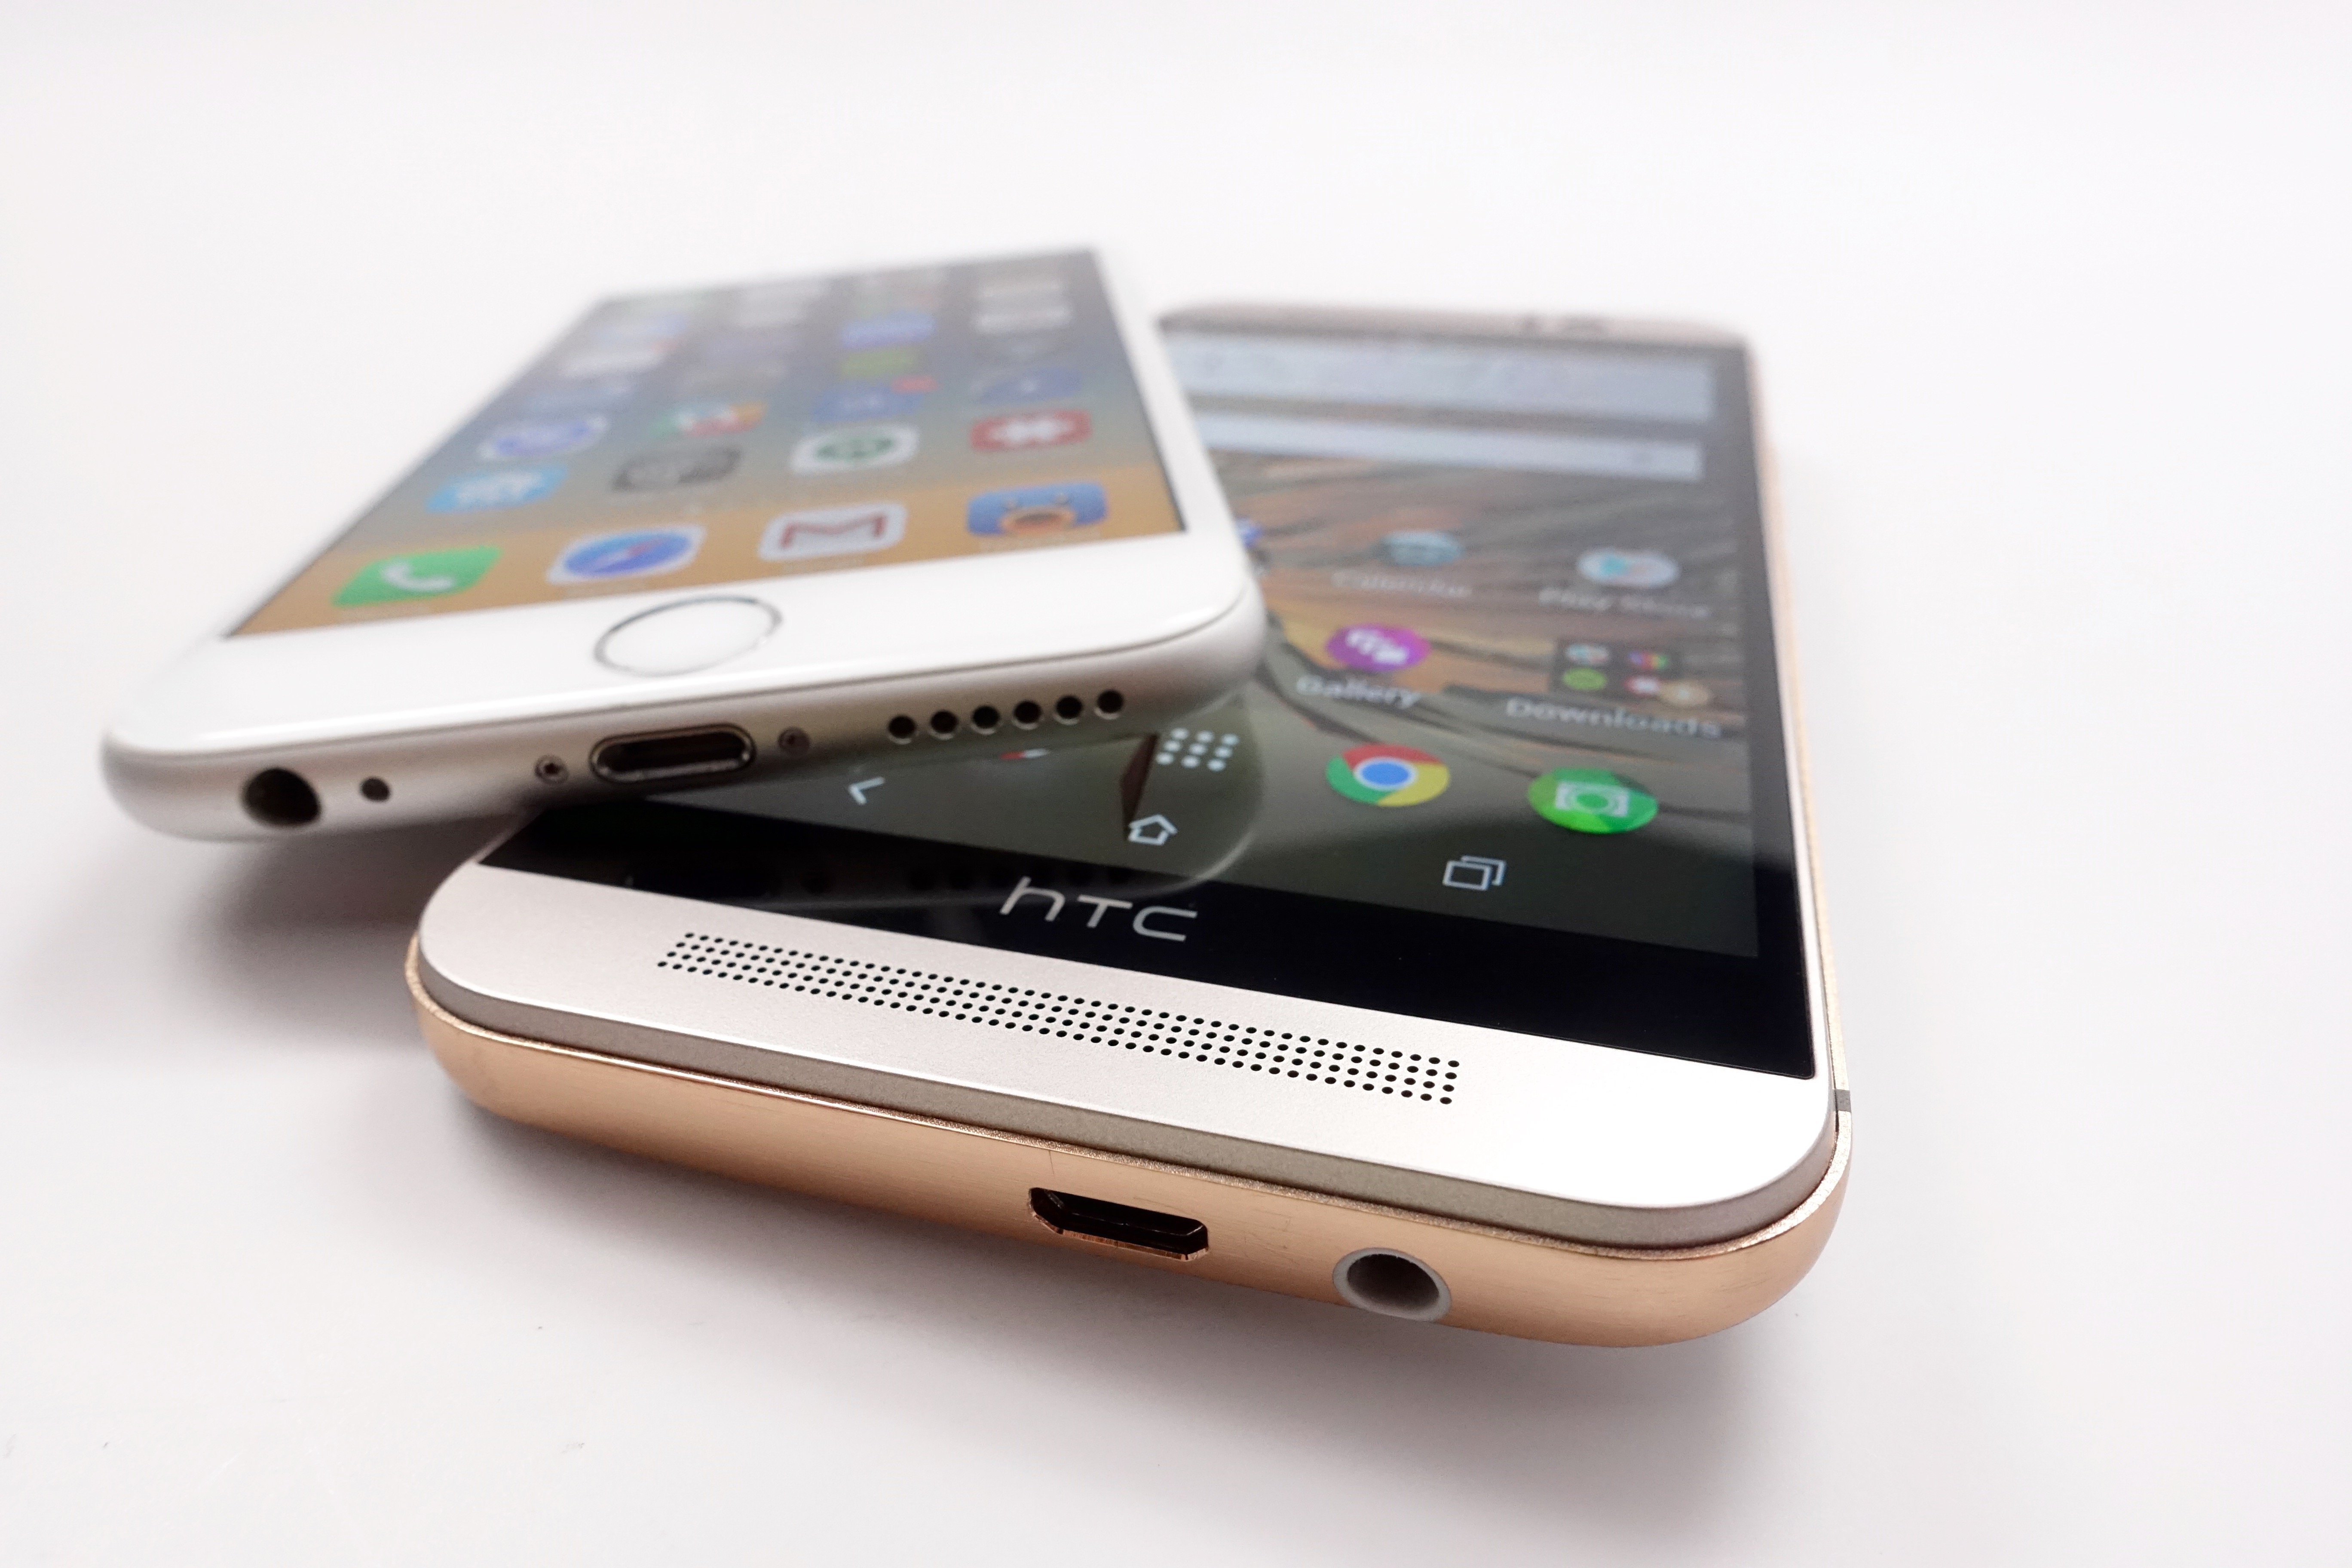 The HTC One M9 BoomSound speakers beat the single iPhone speaker.